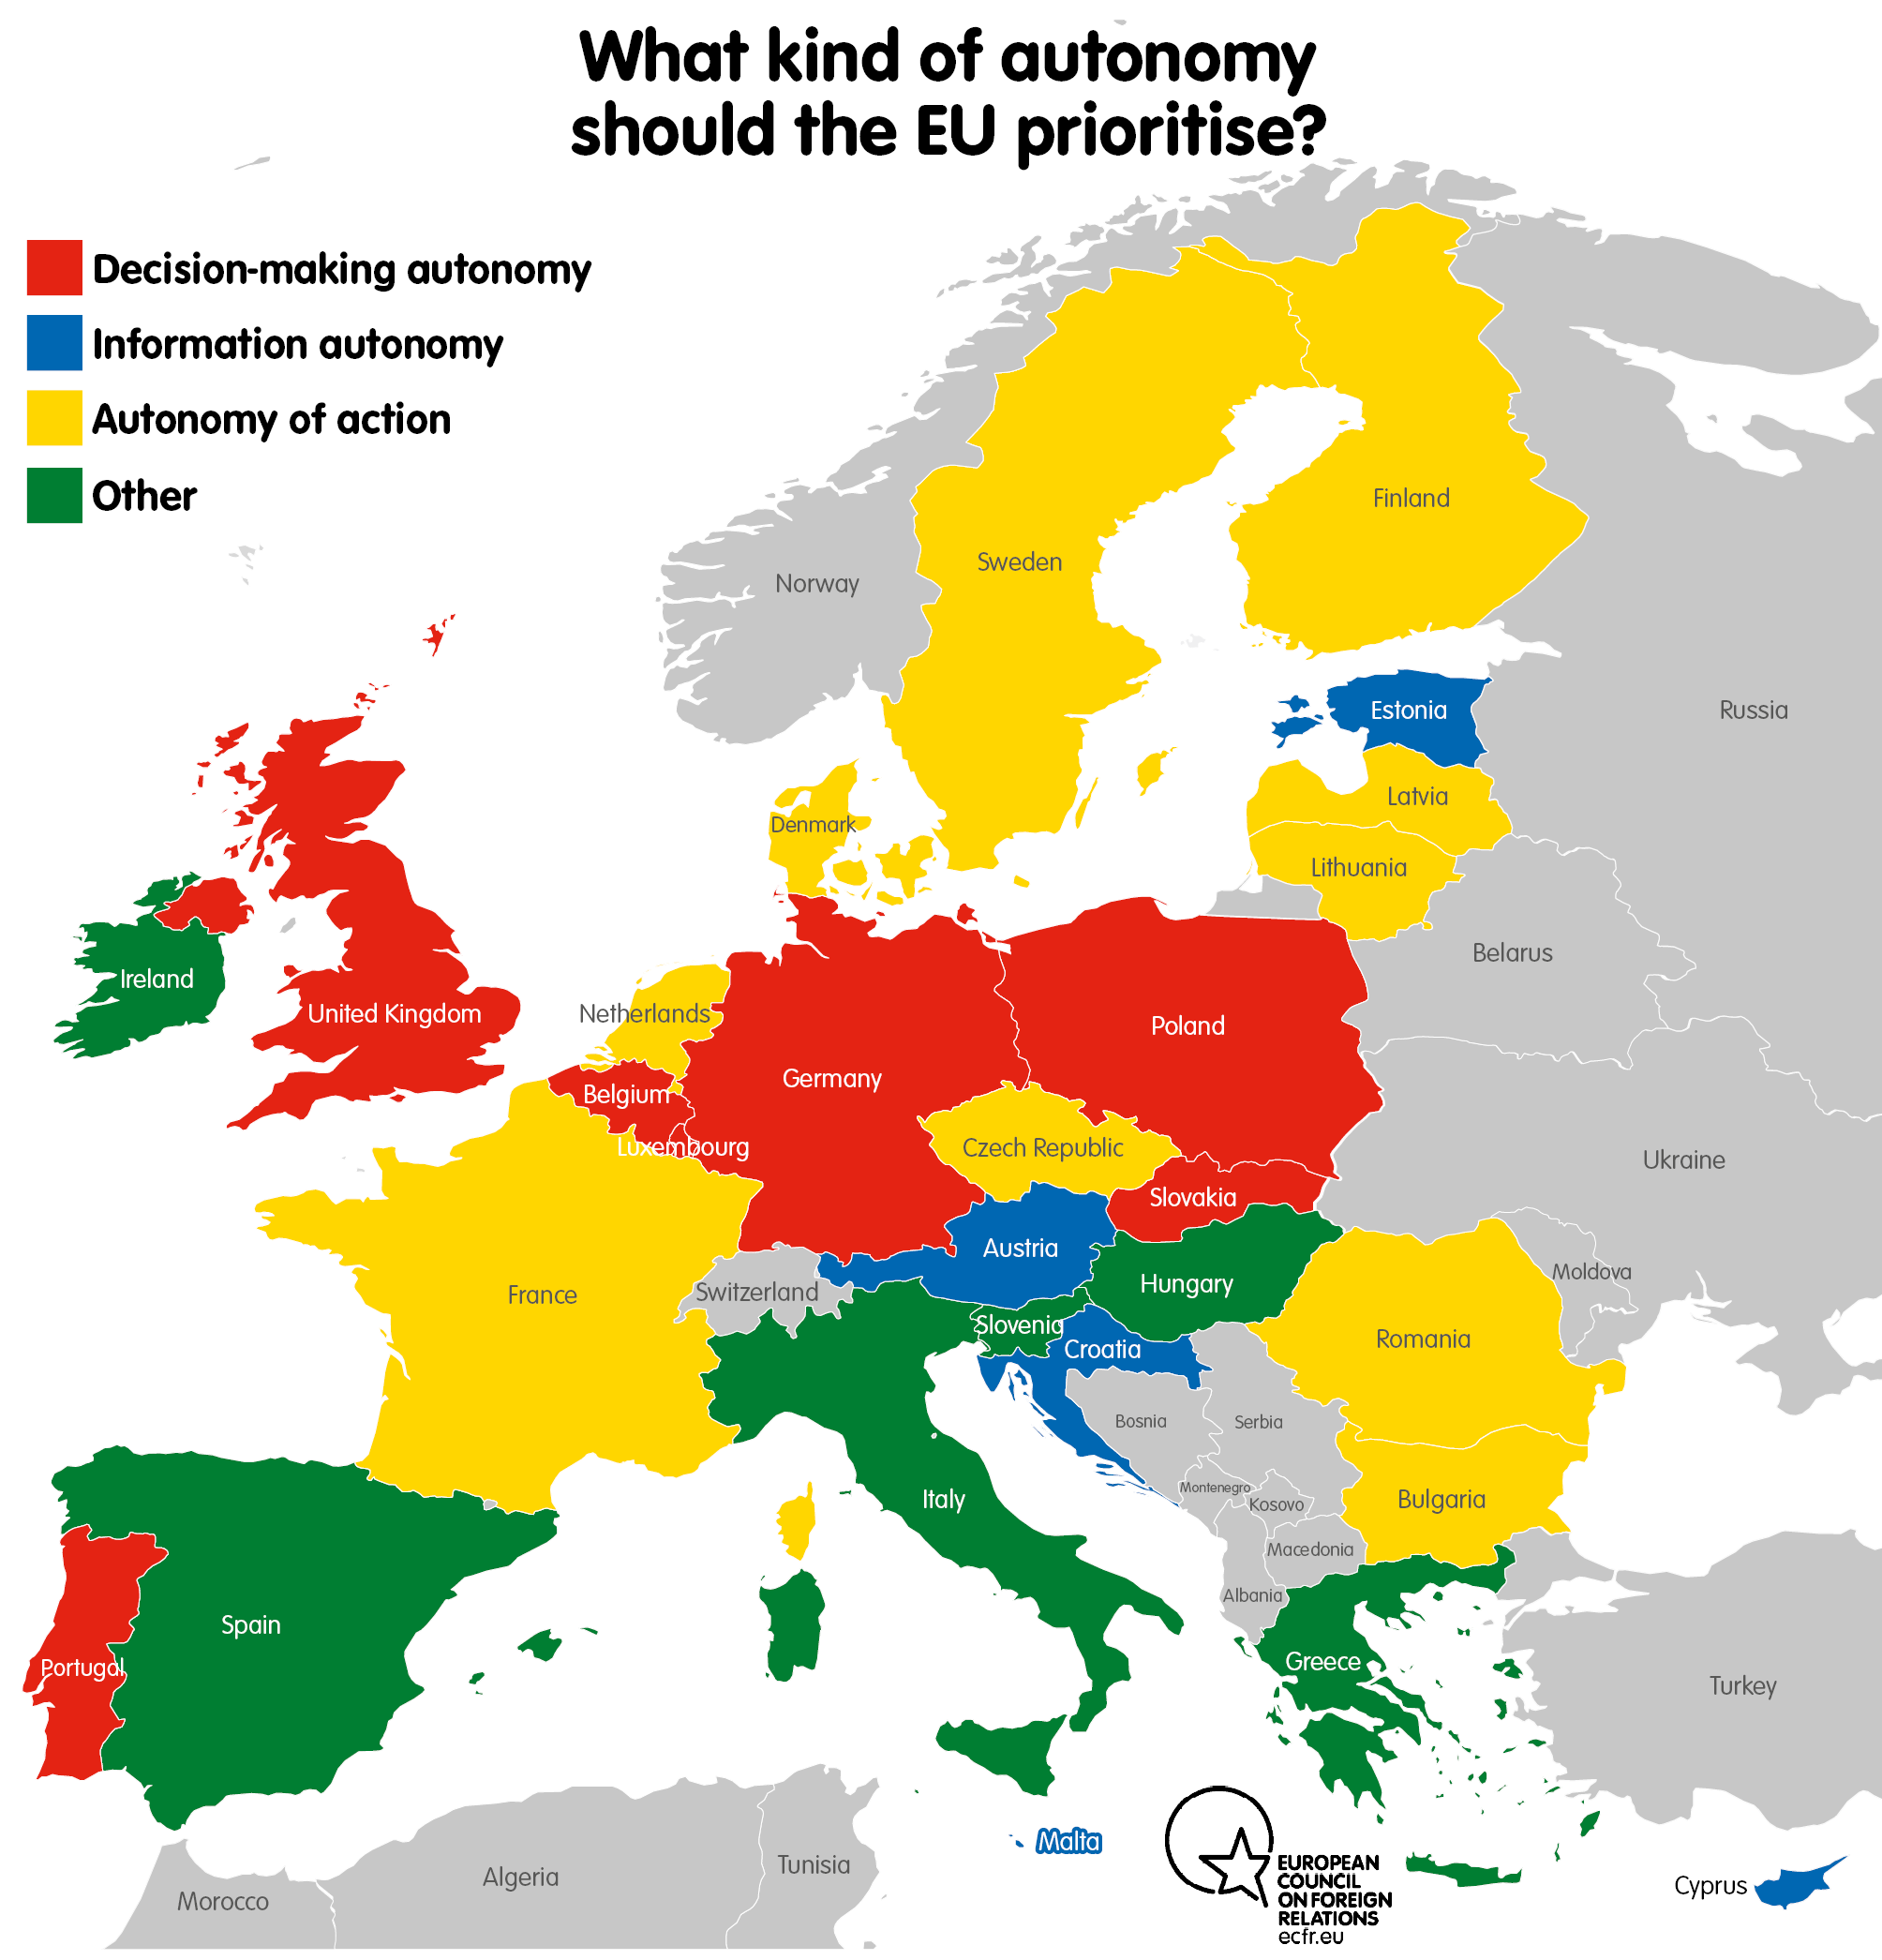 What kind of autonomy should the EU prioritise